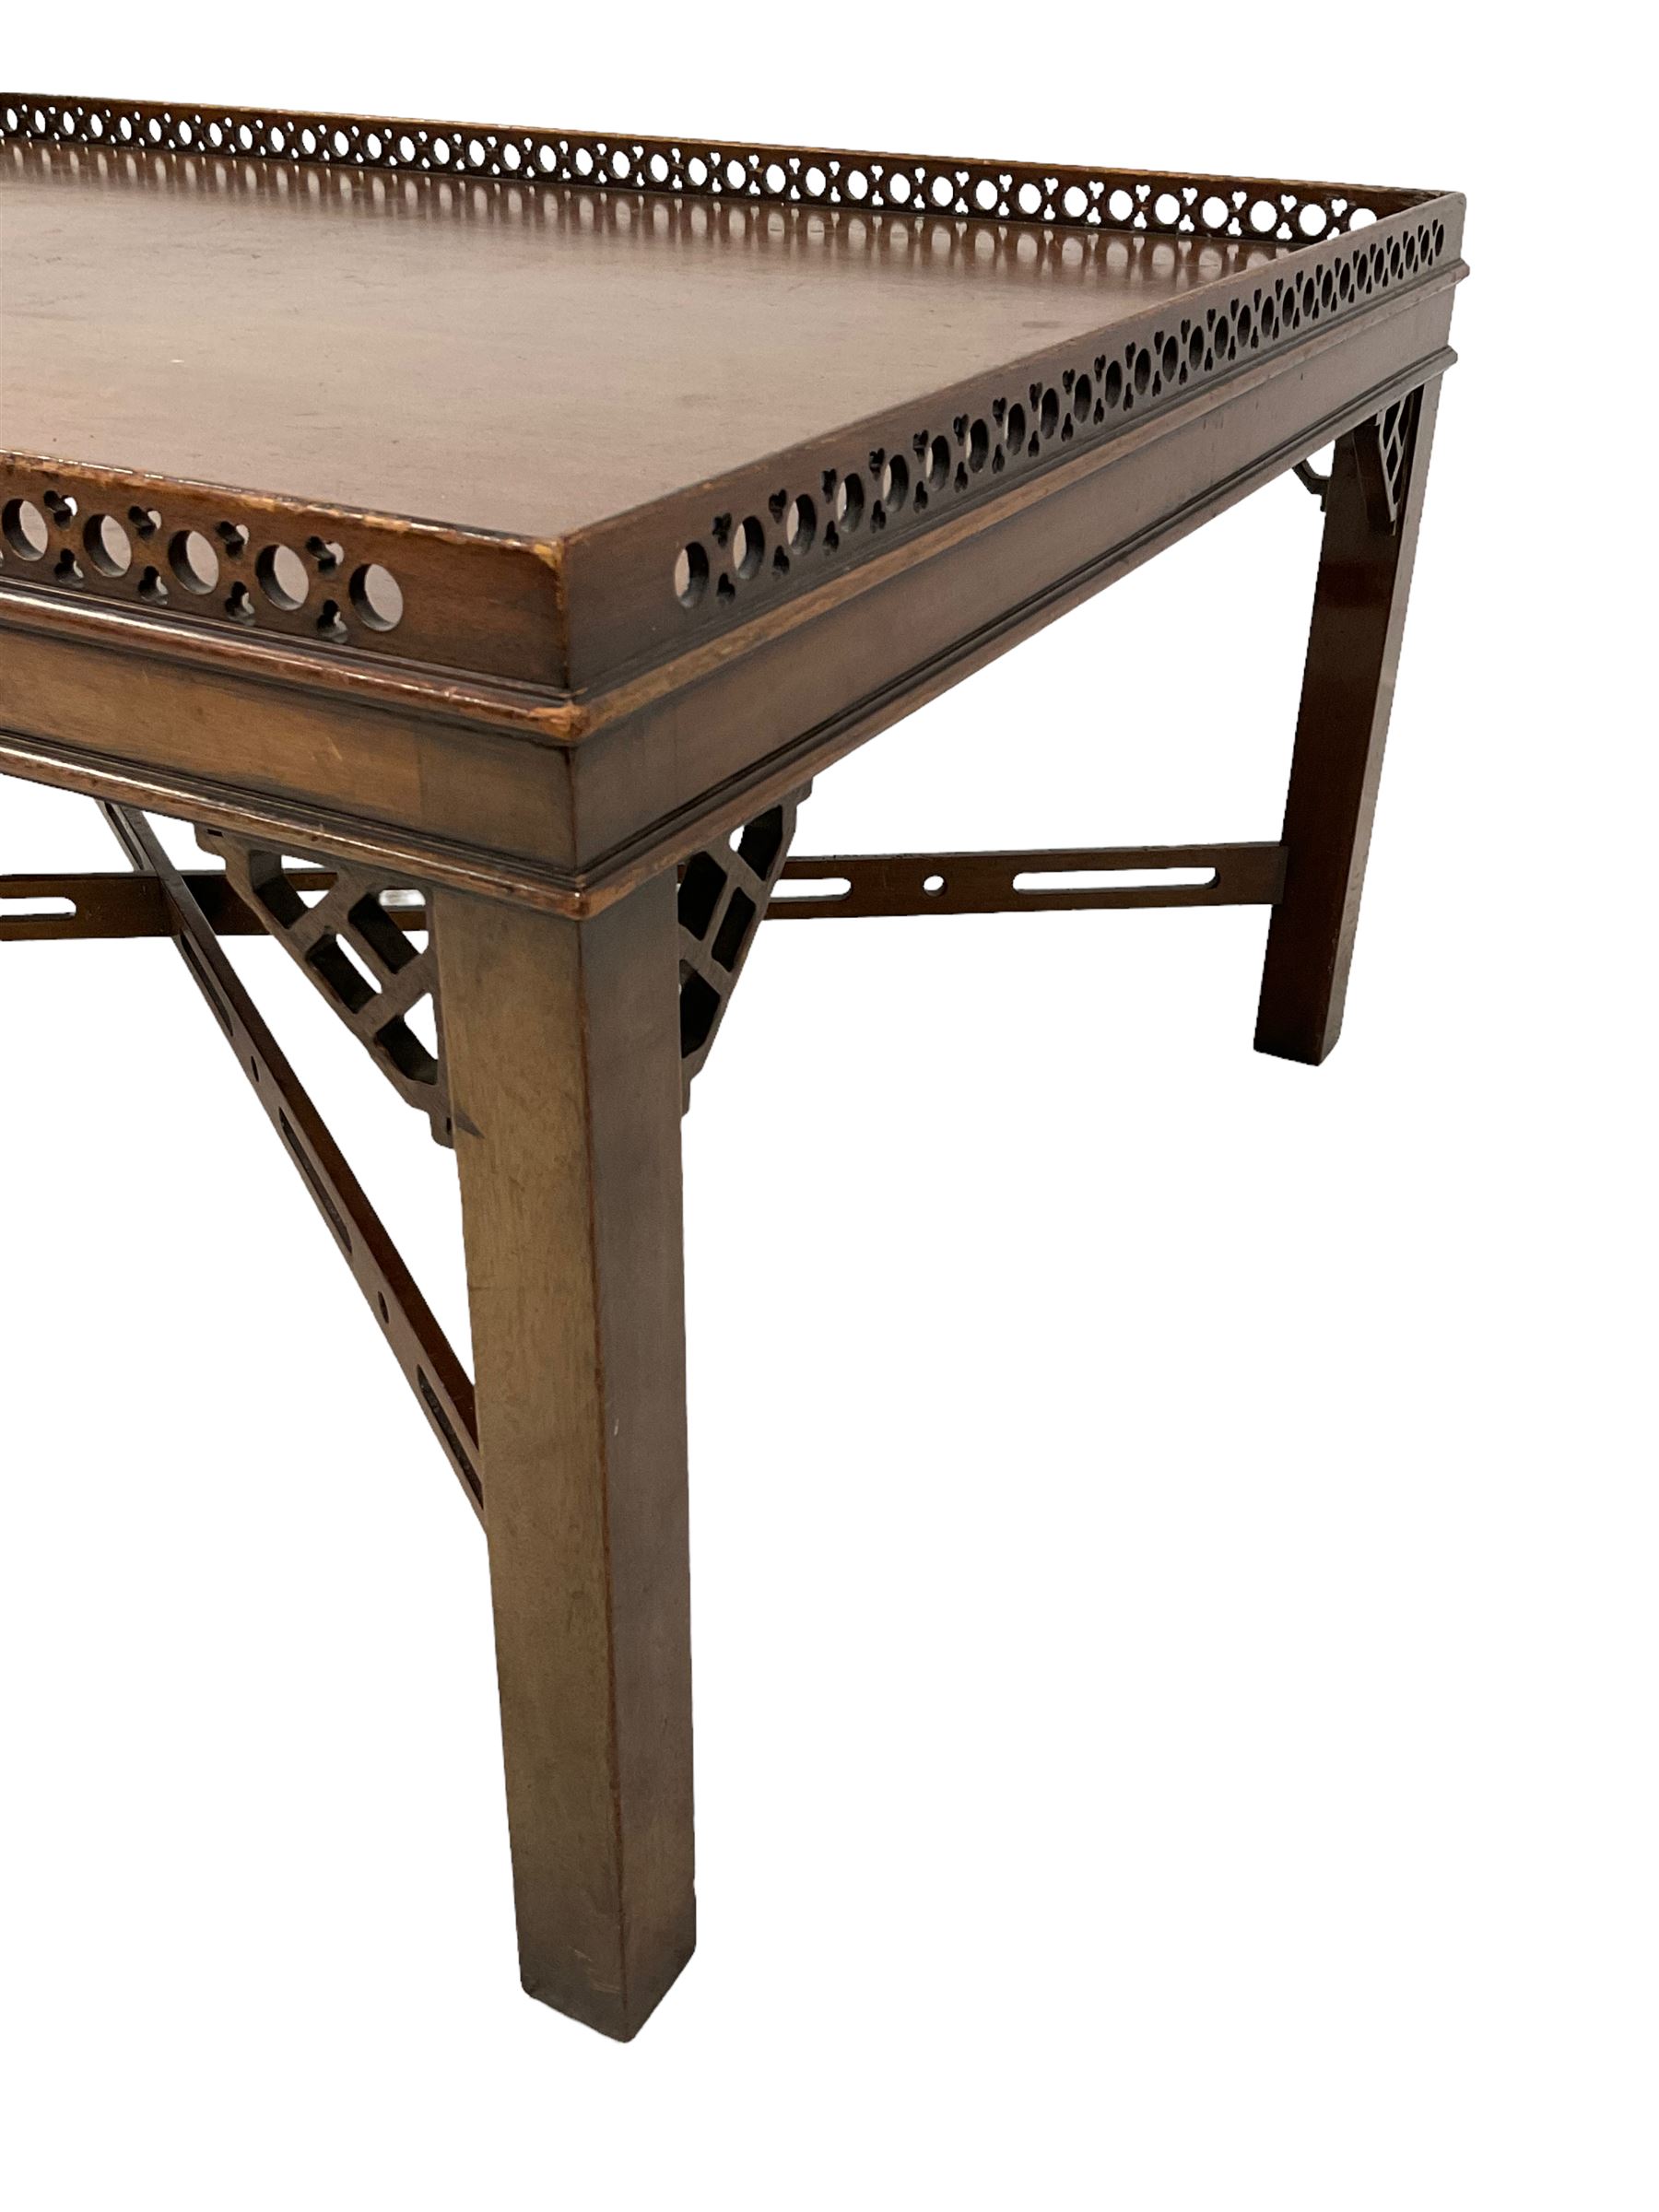 Chippendale design mahogany coffee table - Image 3 of 4